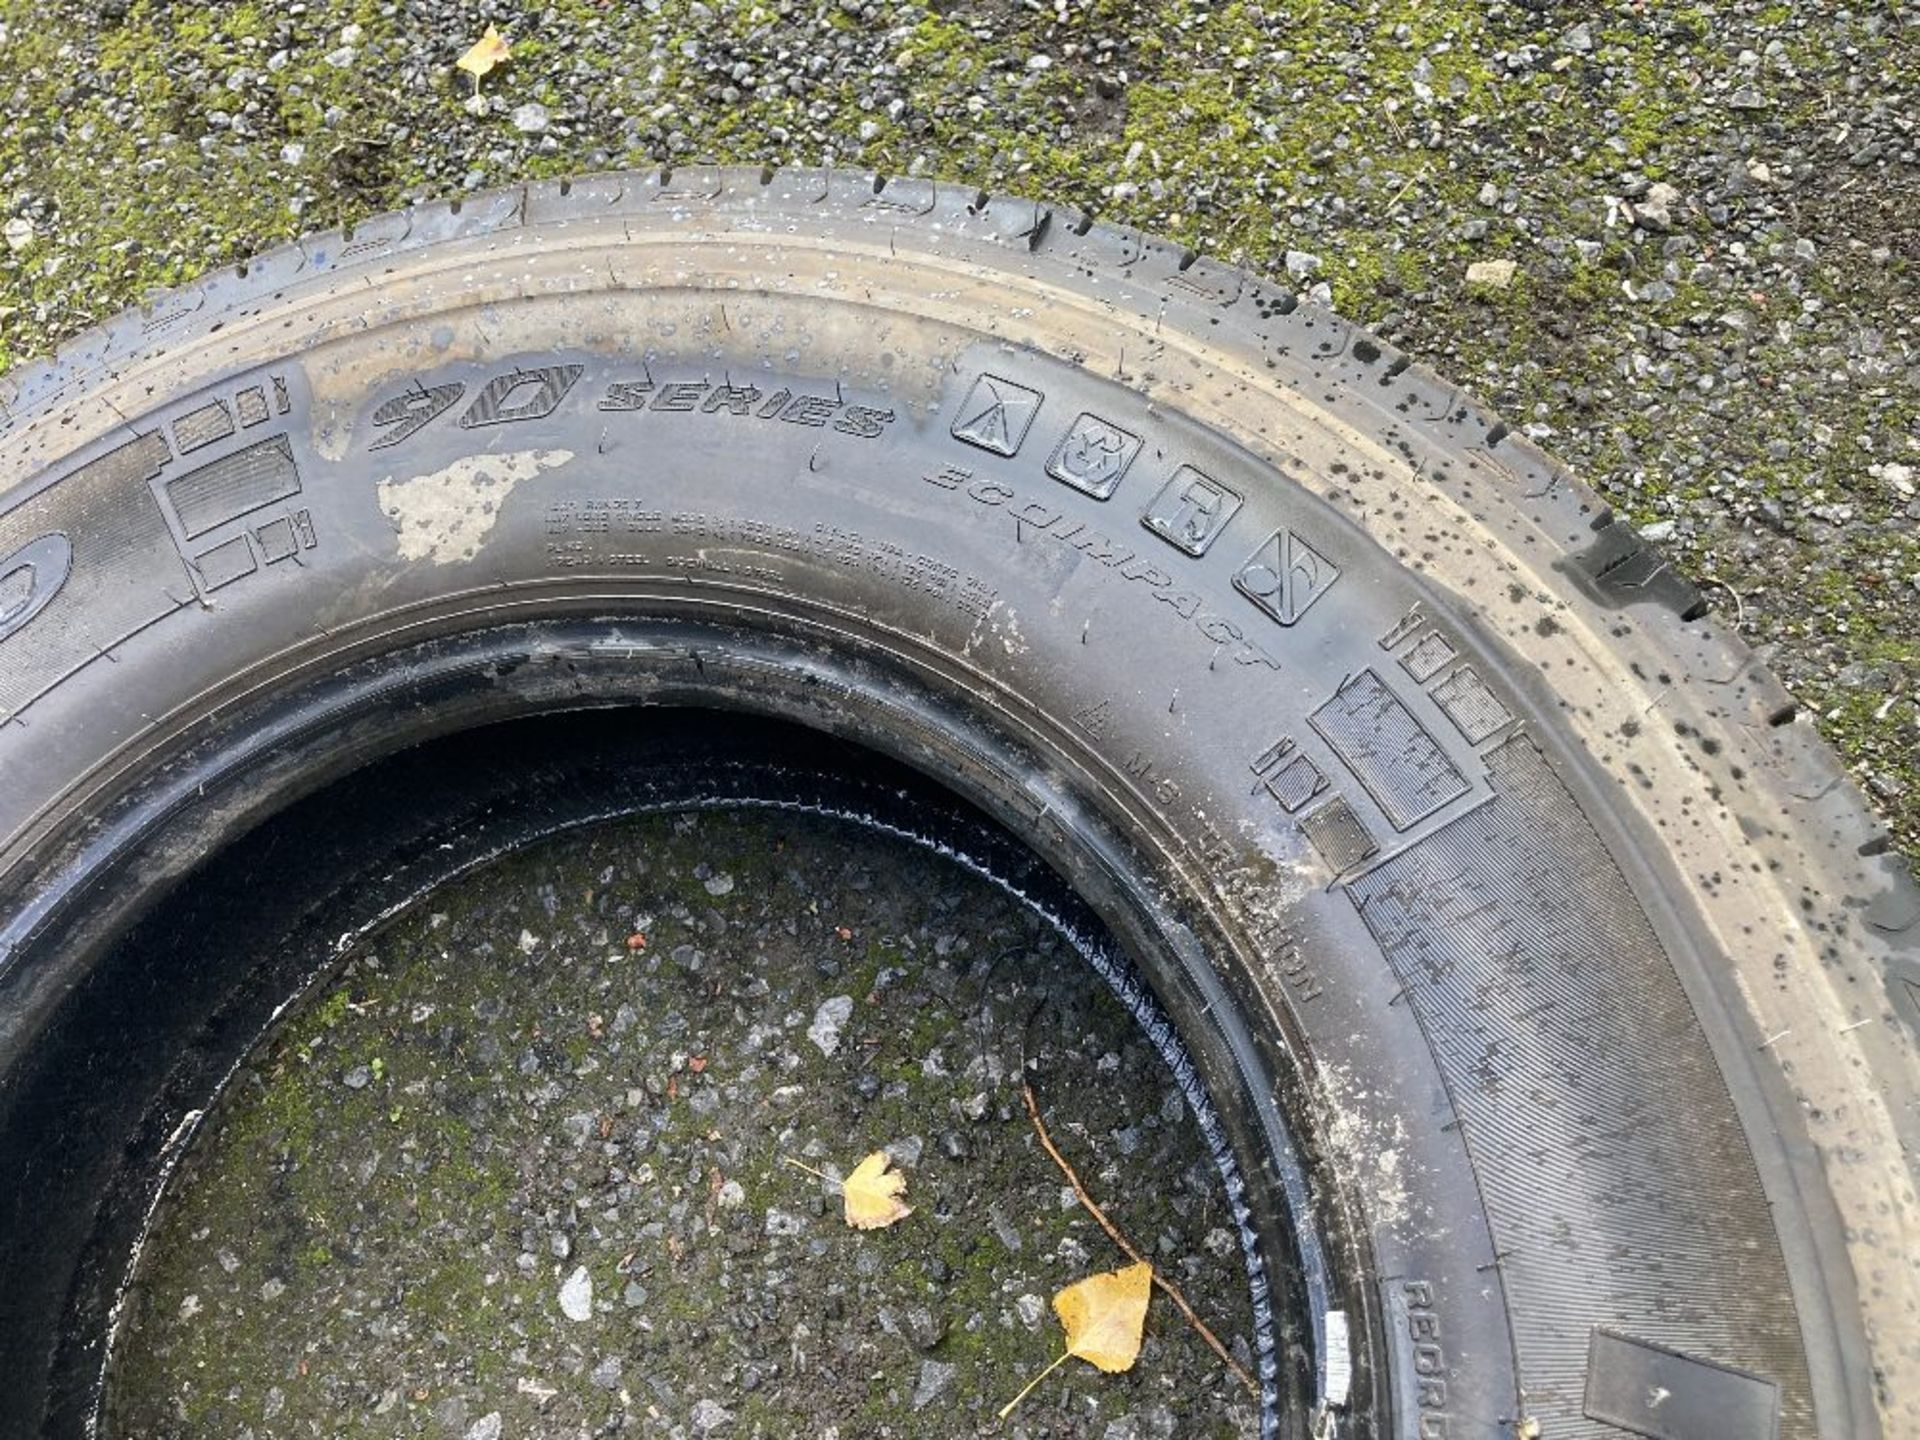 Pirelli Itineris D 315/80R 22.5 radial tubeless regroovable HGV tyre - Image 6 of 6